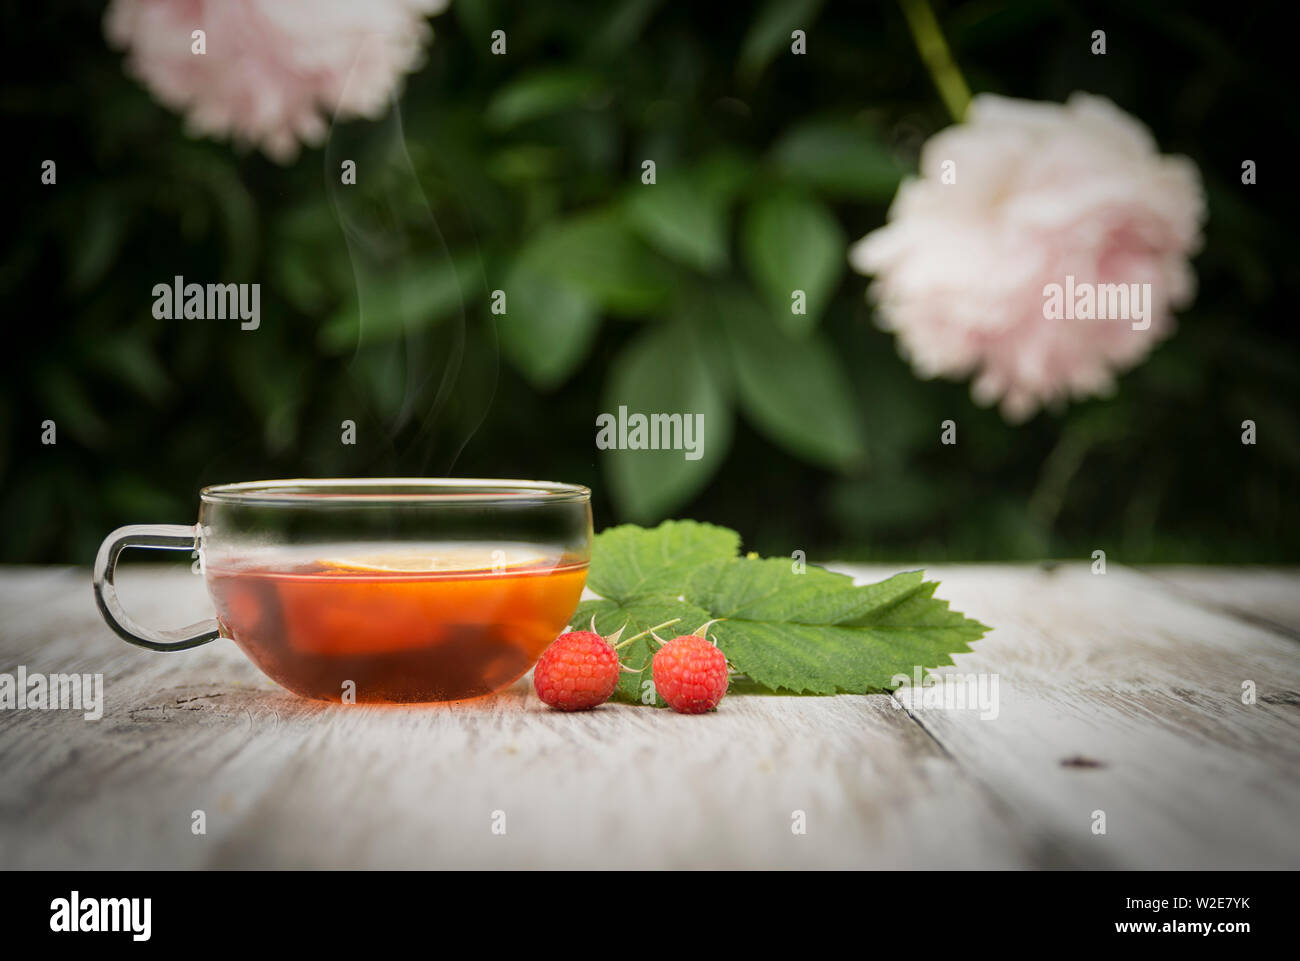 cup of fruit tea on wooden retro boards and flowers and plants in the background Stock Photo